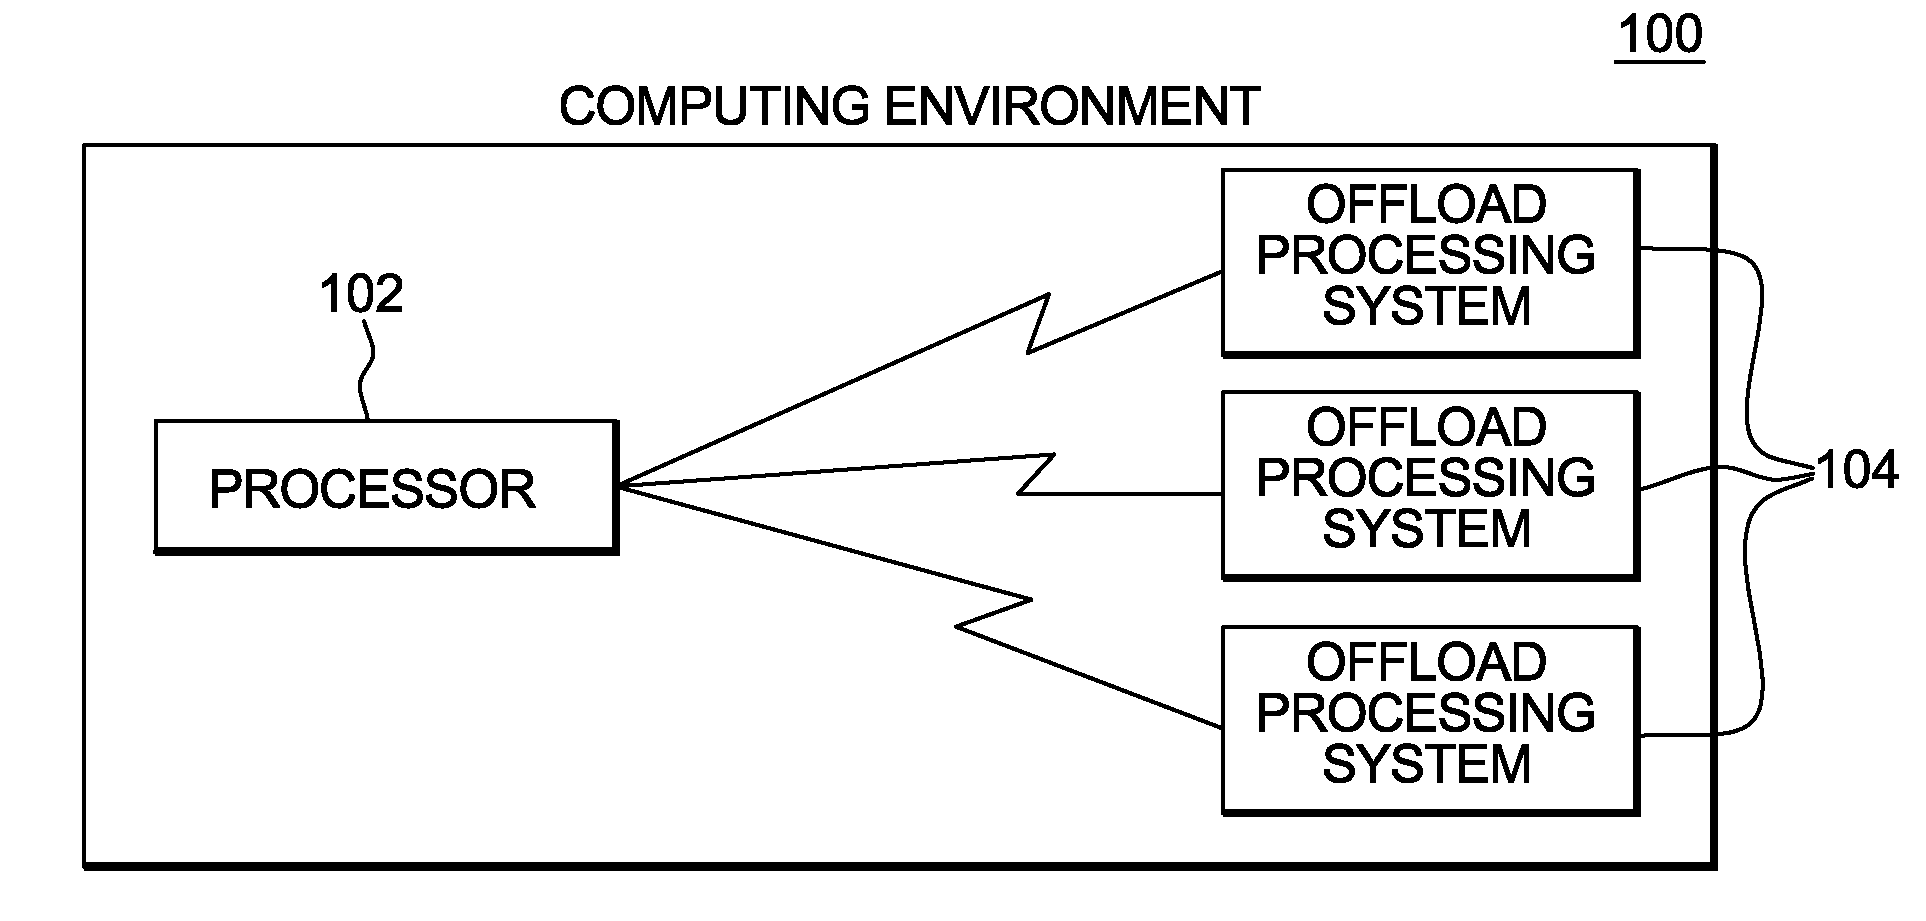 Execution of work units in a heterogeneous computing environment